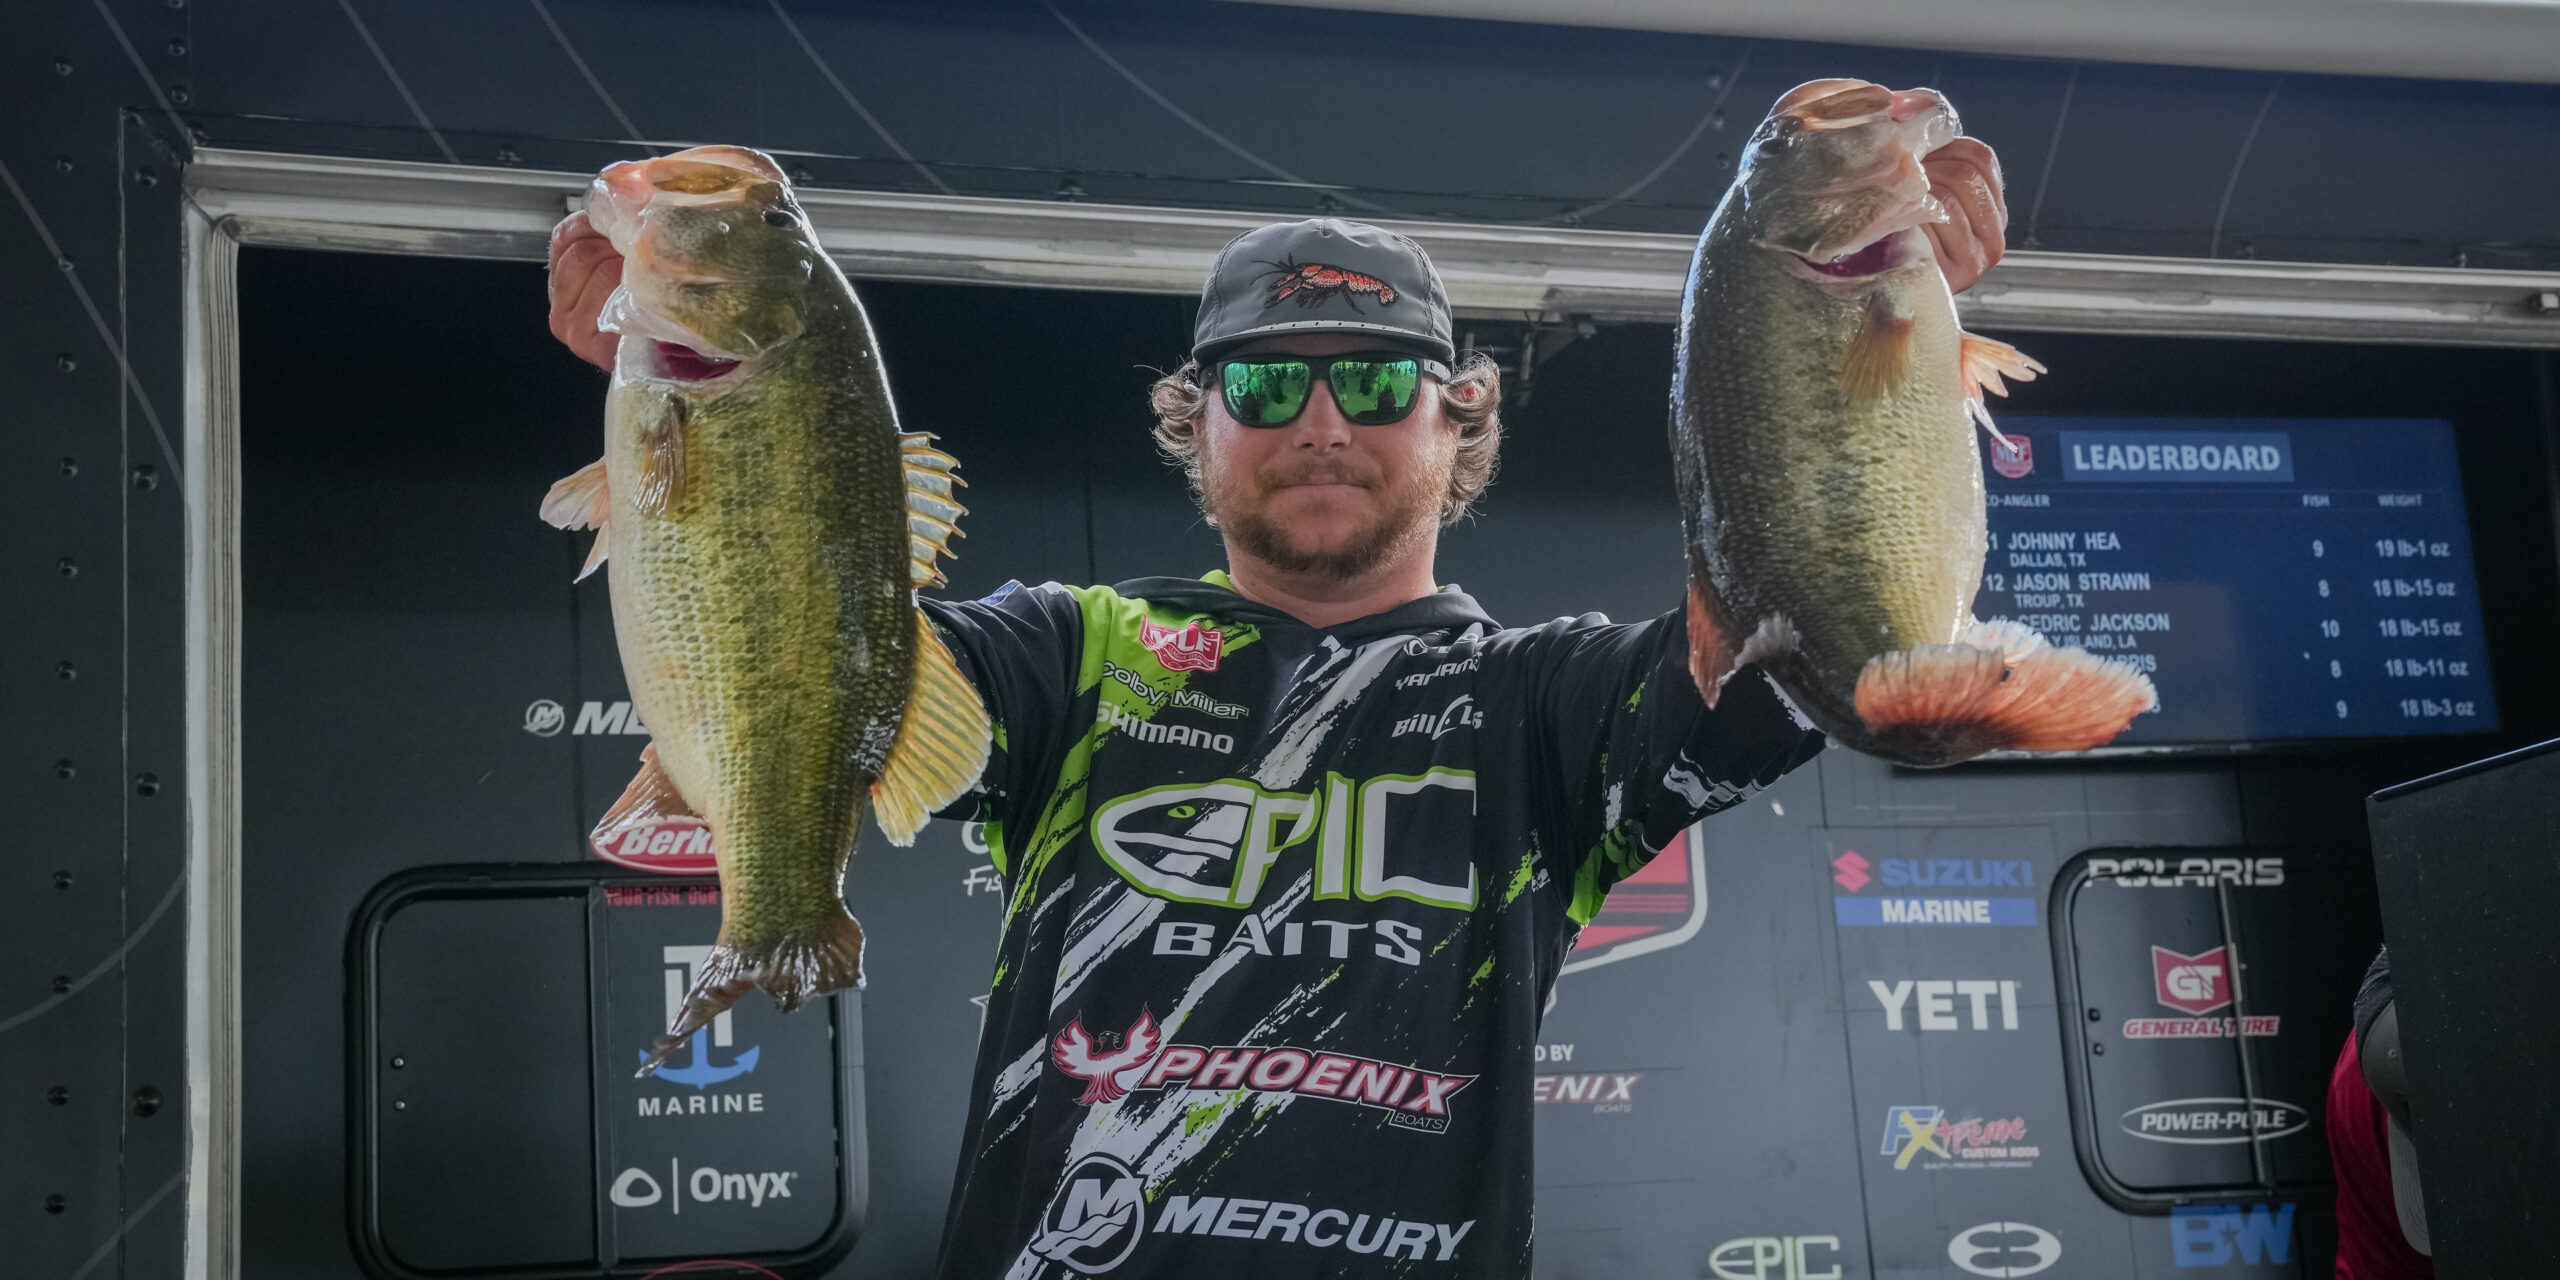 Thompson Adapts to Conditions, Wins Two-Day Phoenix Bass Fishing League  Super Tournament on the St. Lawrence River – Anglers Channel